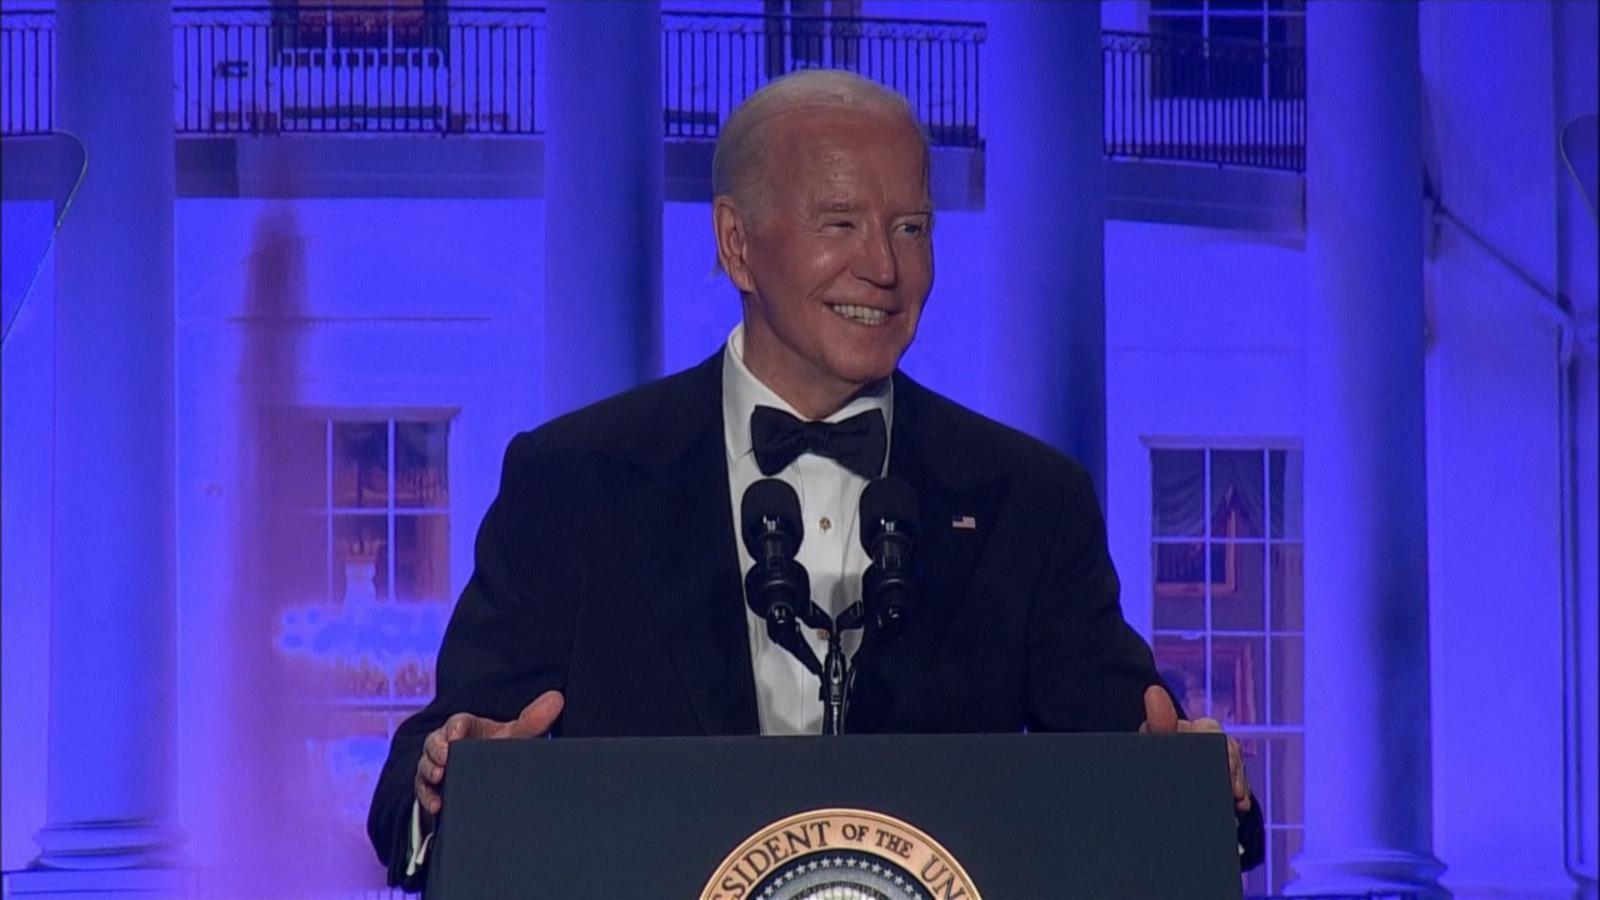 VIDEO: Biden takes to the stage at White House correspondents' dinner for annual roast